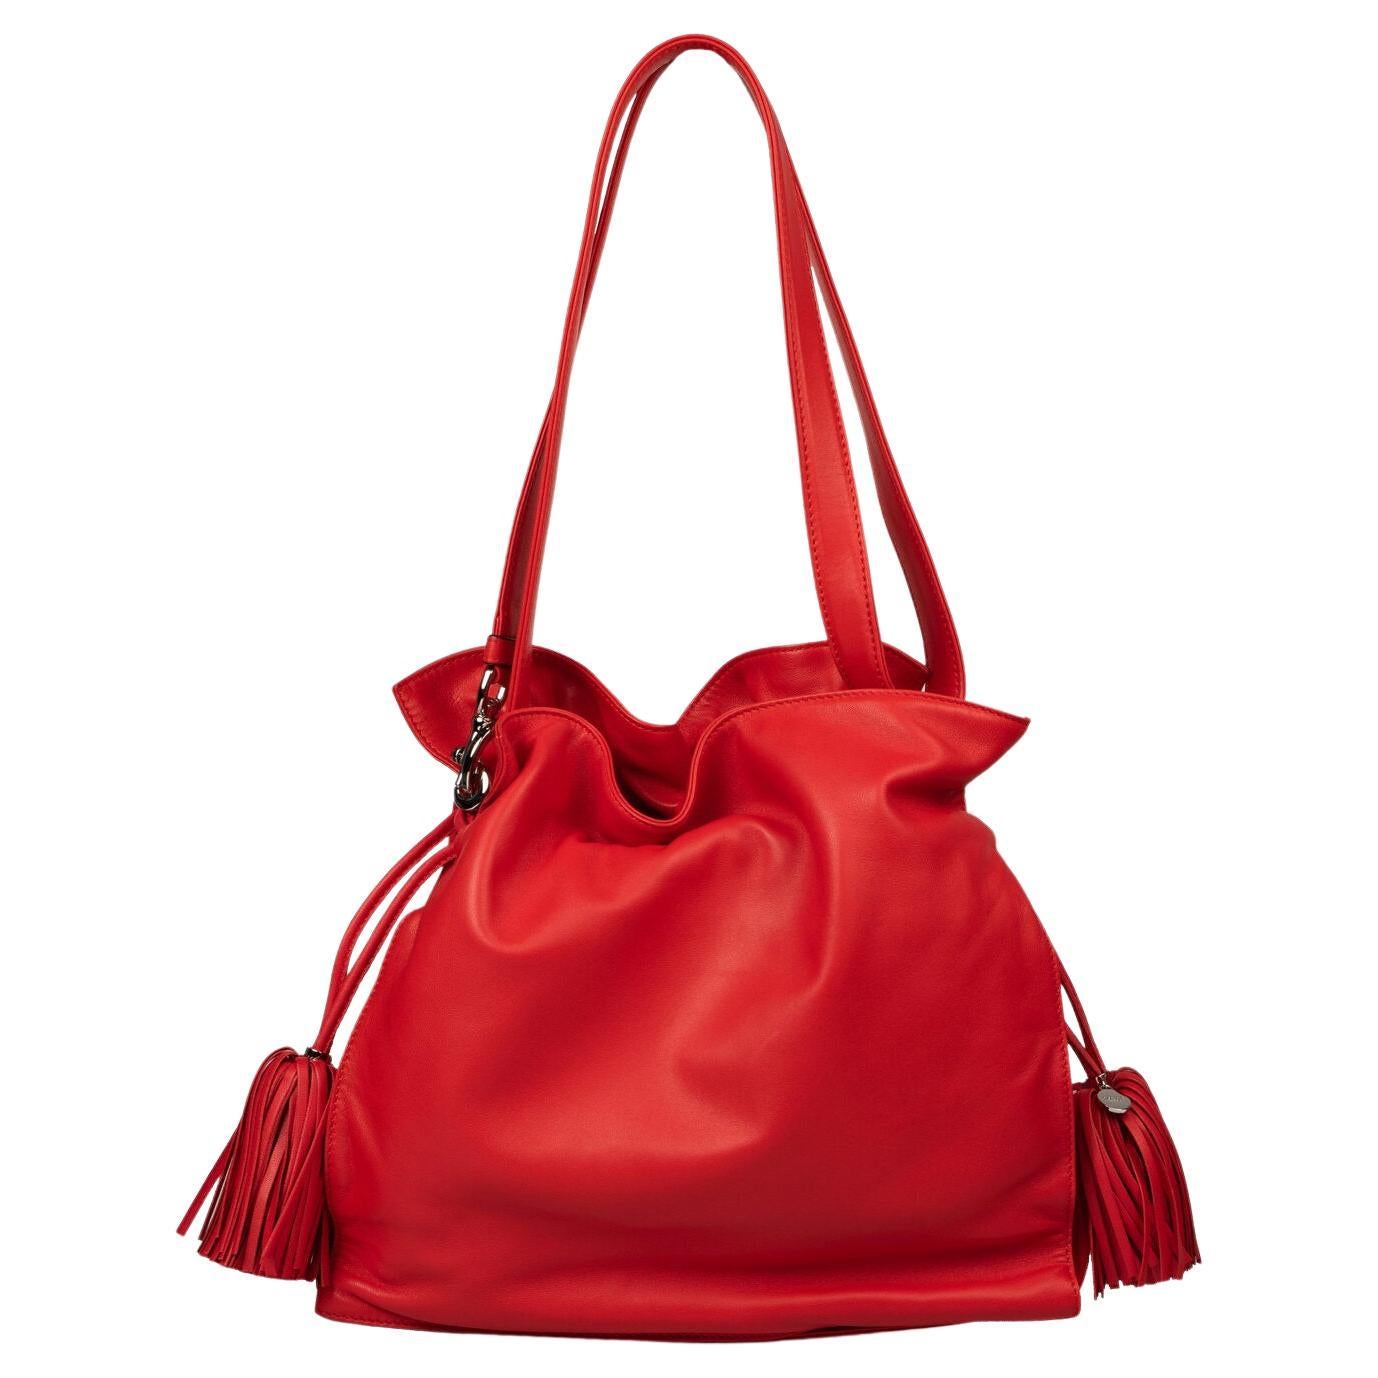 Non-Leather Handbag LOEWE red Non-Leather Handbags Loewe Women Women Bags Loewe Women Non-Leather Bags Loewe Women Non-Leather Handbags Loewe Women 